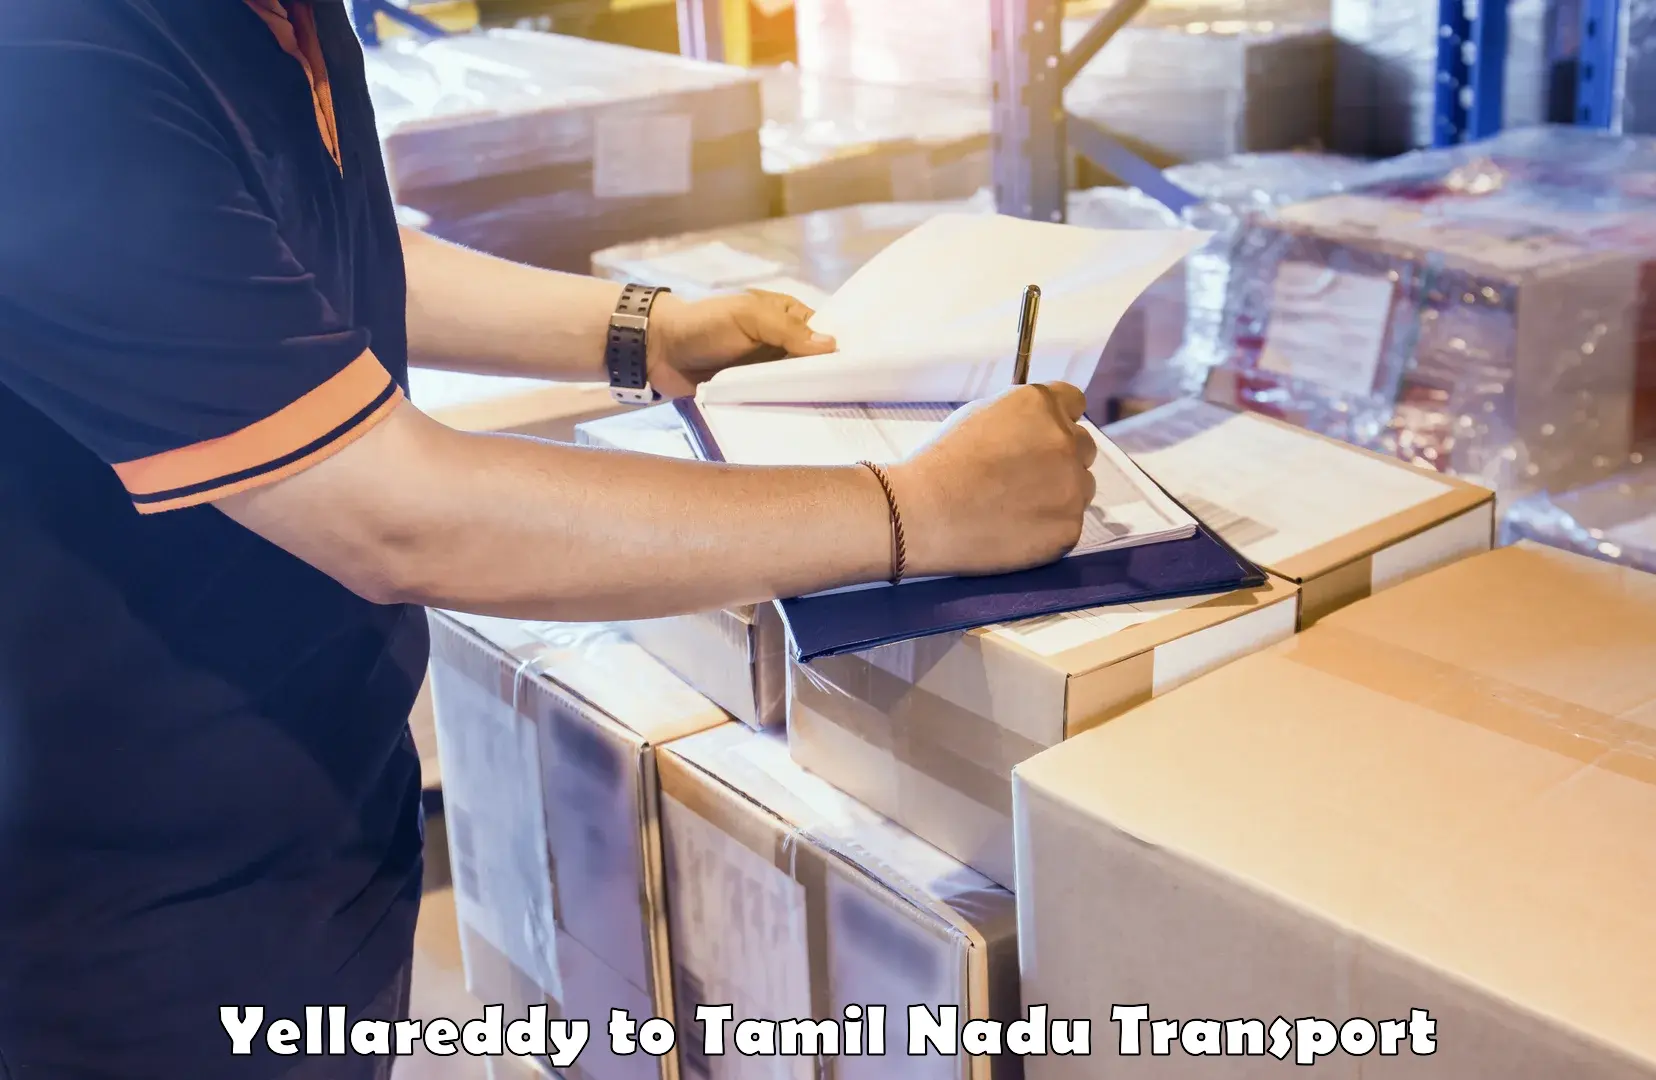 Parcel transport services Yellareddy to Shanmugha Arts Science Technology and Research Academy Thanjavur